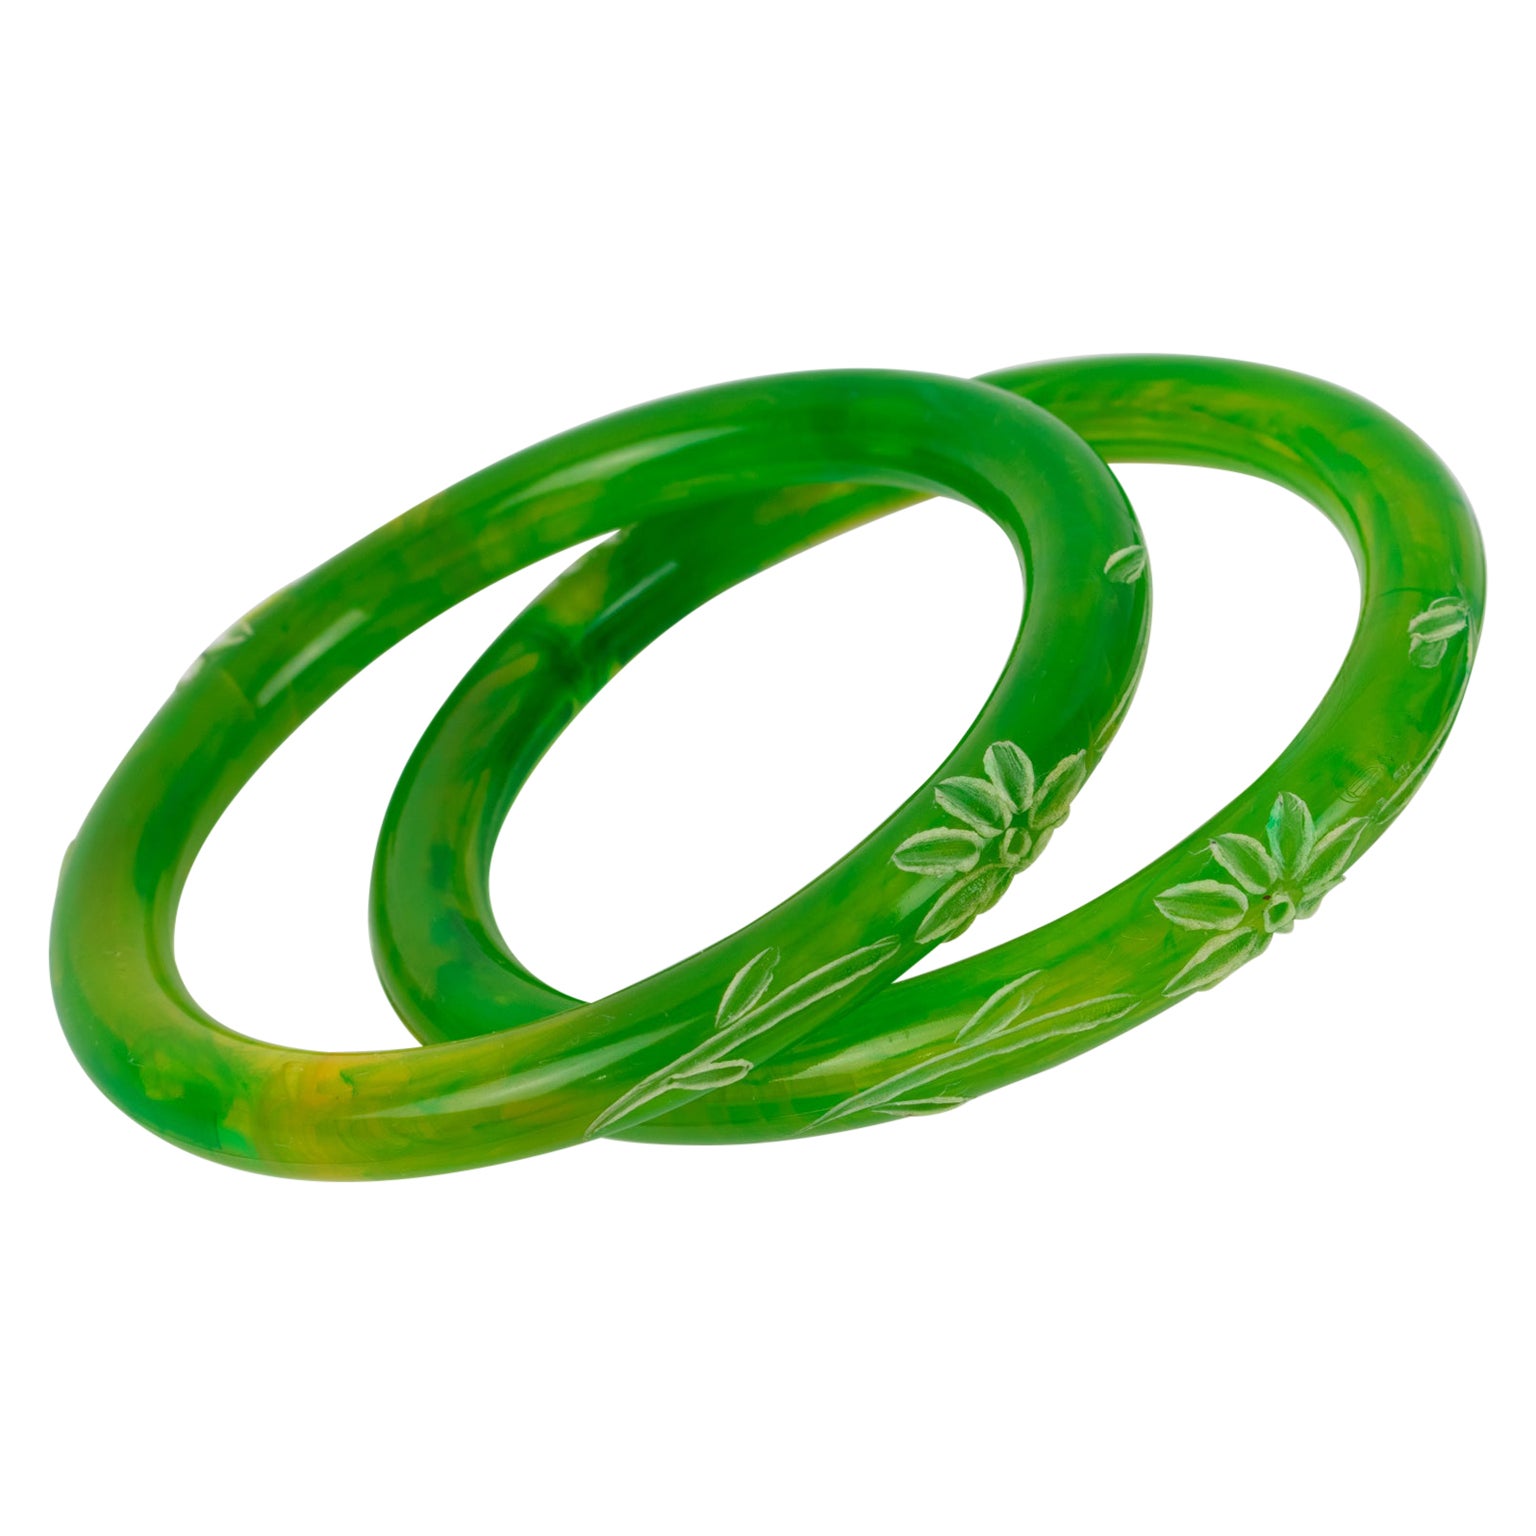 Lucite Bracelet Bangle Green Grass Swirl with Floral Carving, set of 2 pieces For Sale